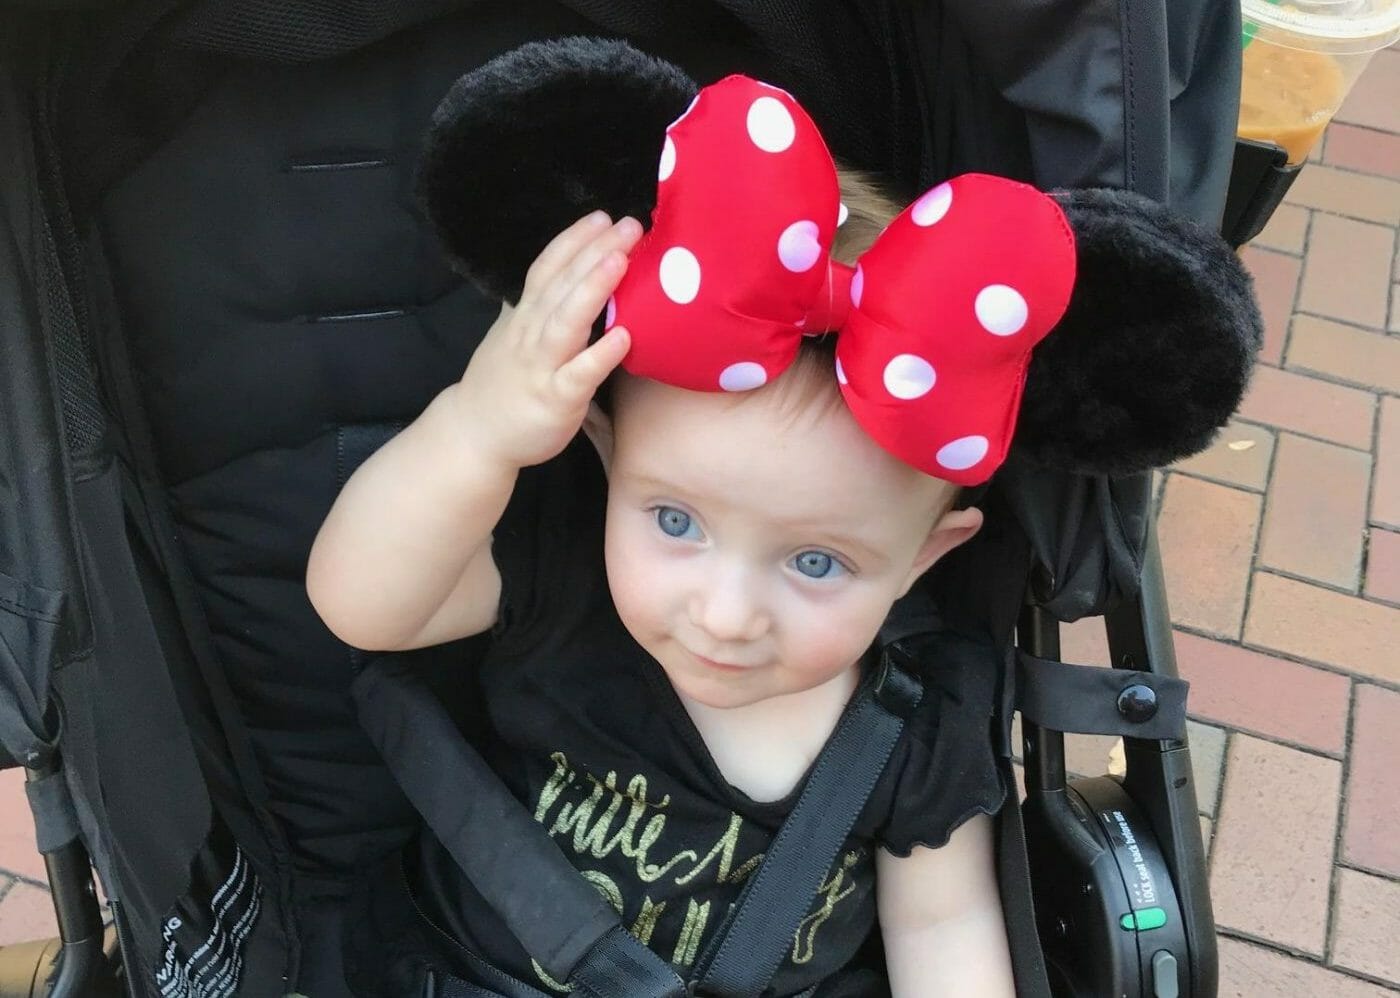 A baby sits in an Ergobaby stroller at Disneyland